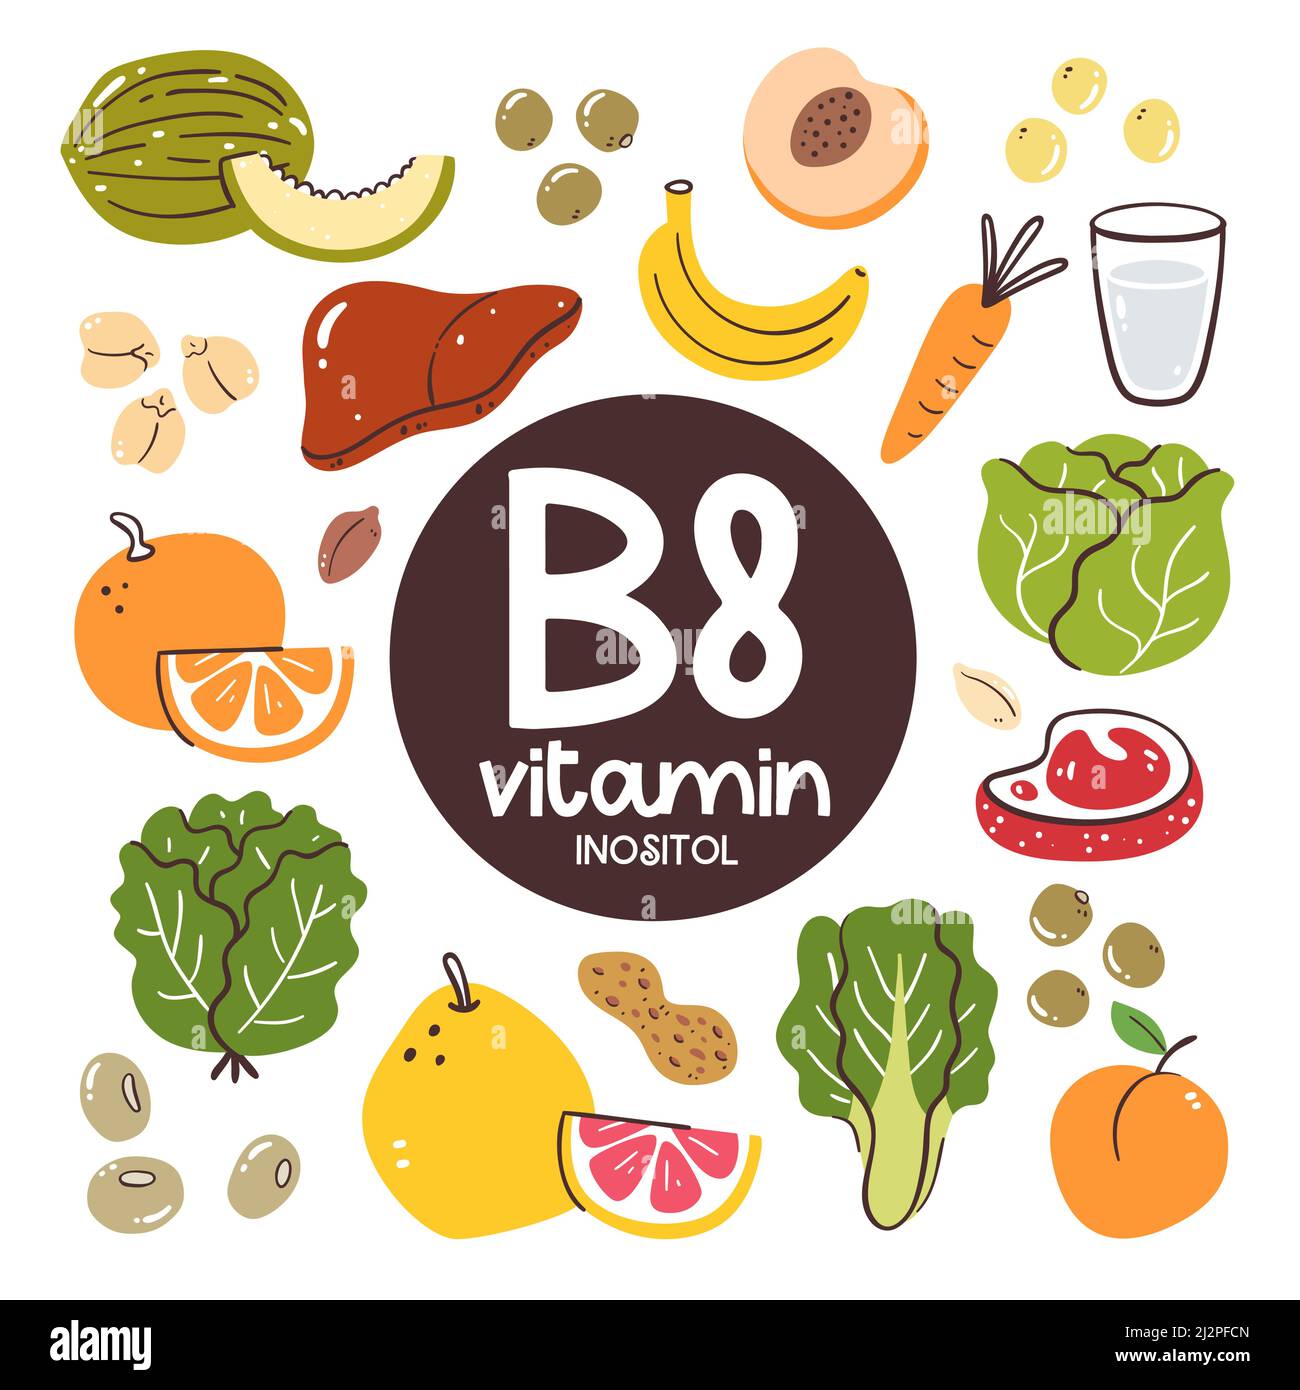 Food products with high level of Vitamin B8 (Inositol). Cooking ingredients. Fruits, vegetables, legumes, milk. Stock Vector